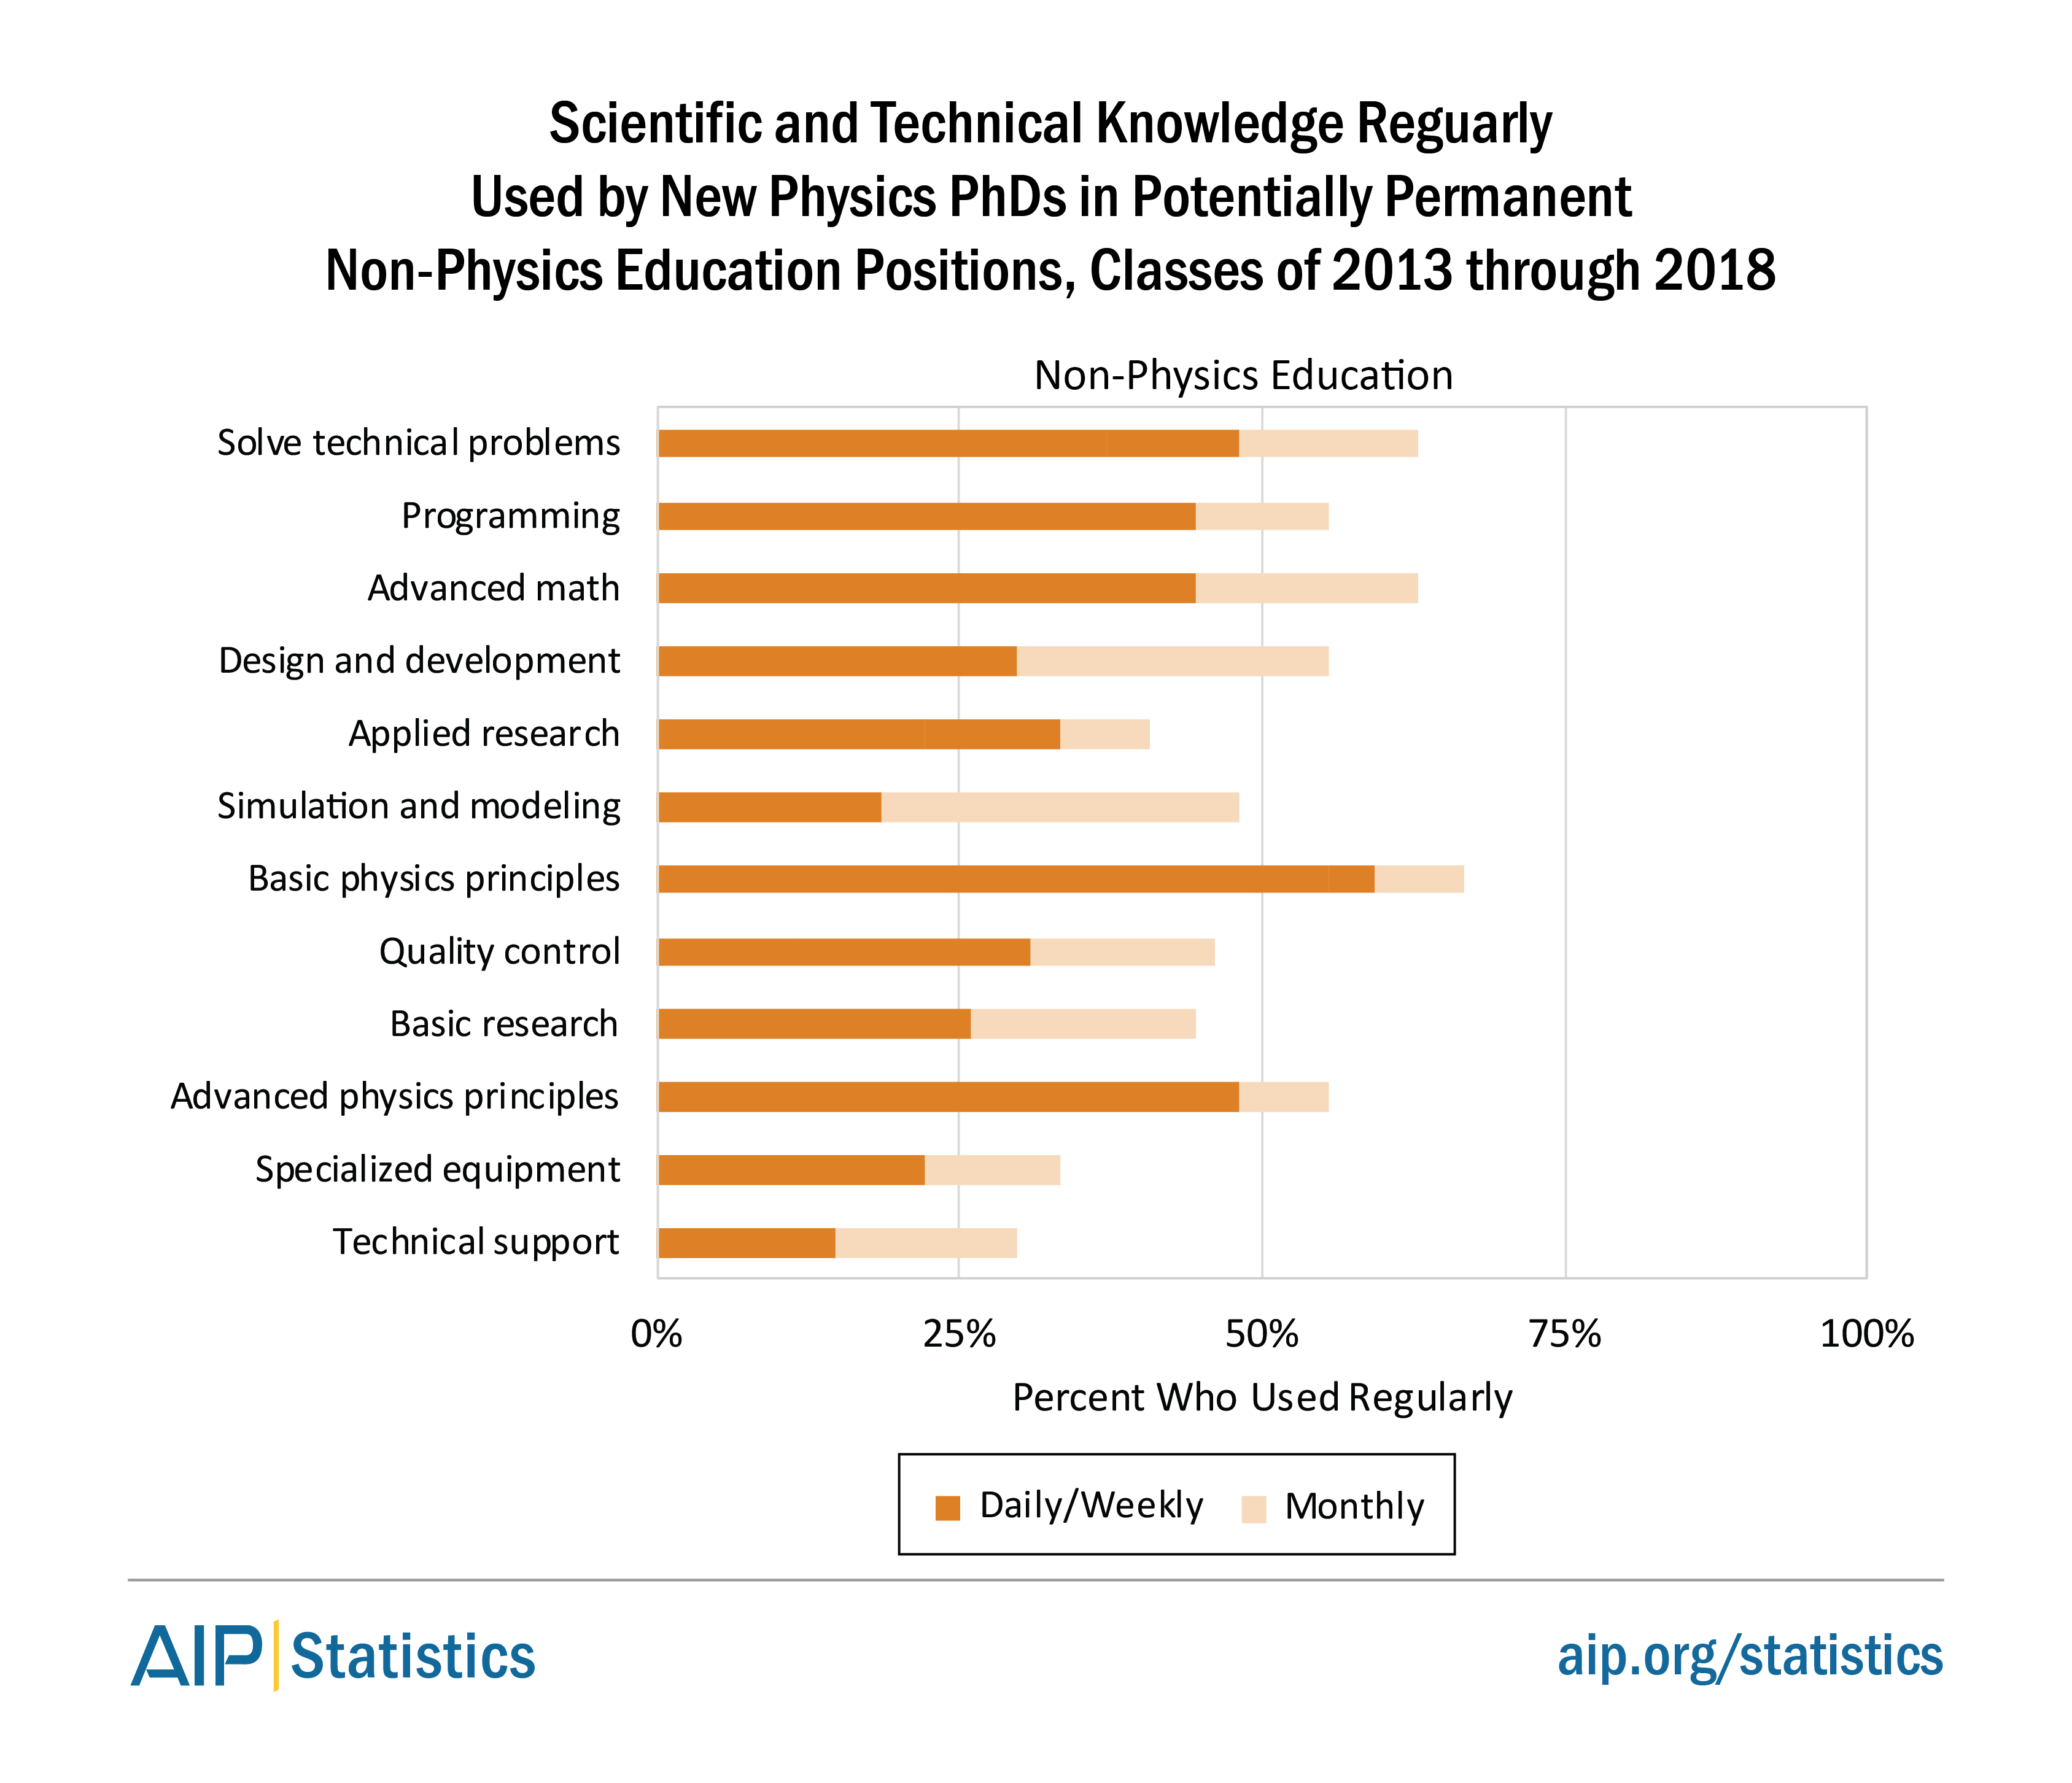 Scientific and Technical Knowledge Used by Physics PhDs in Non-Physics Education Positions